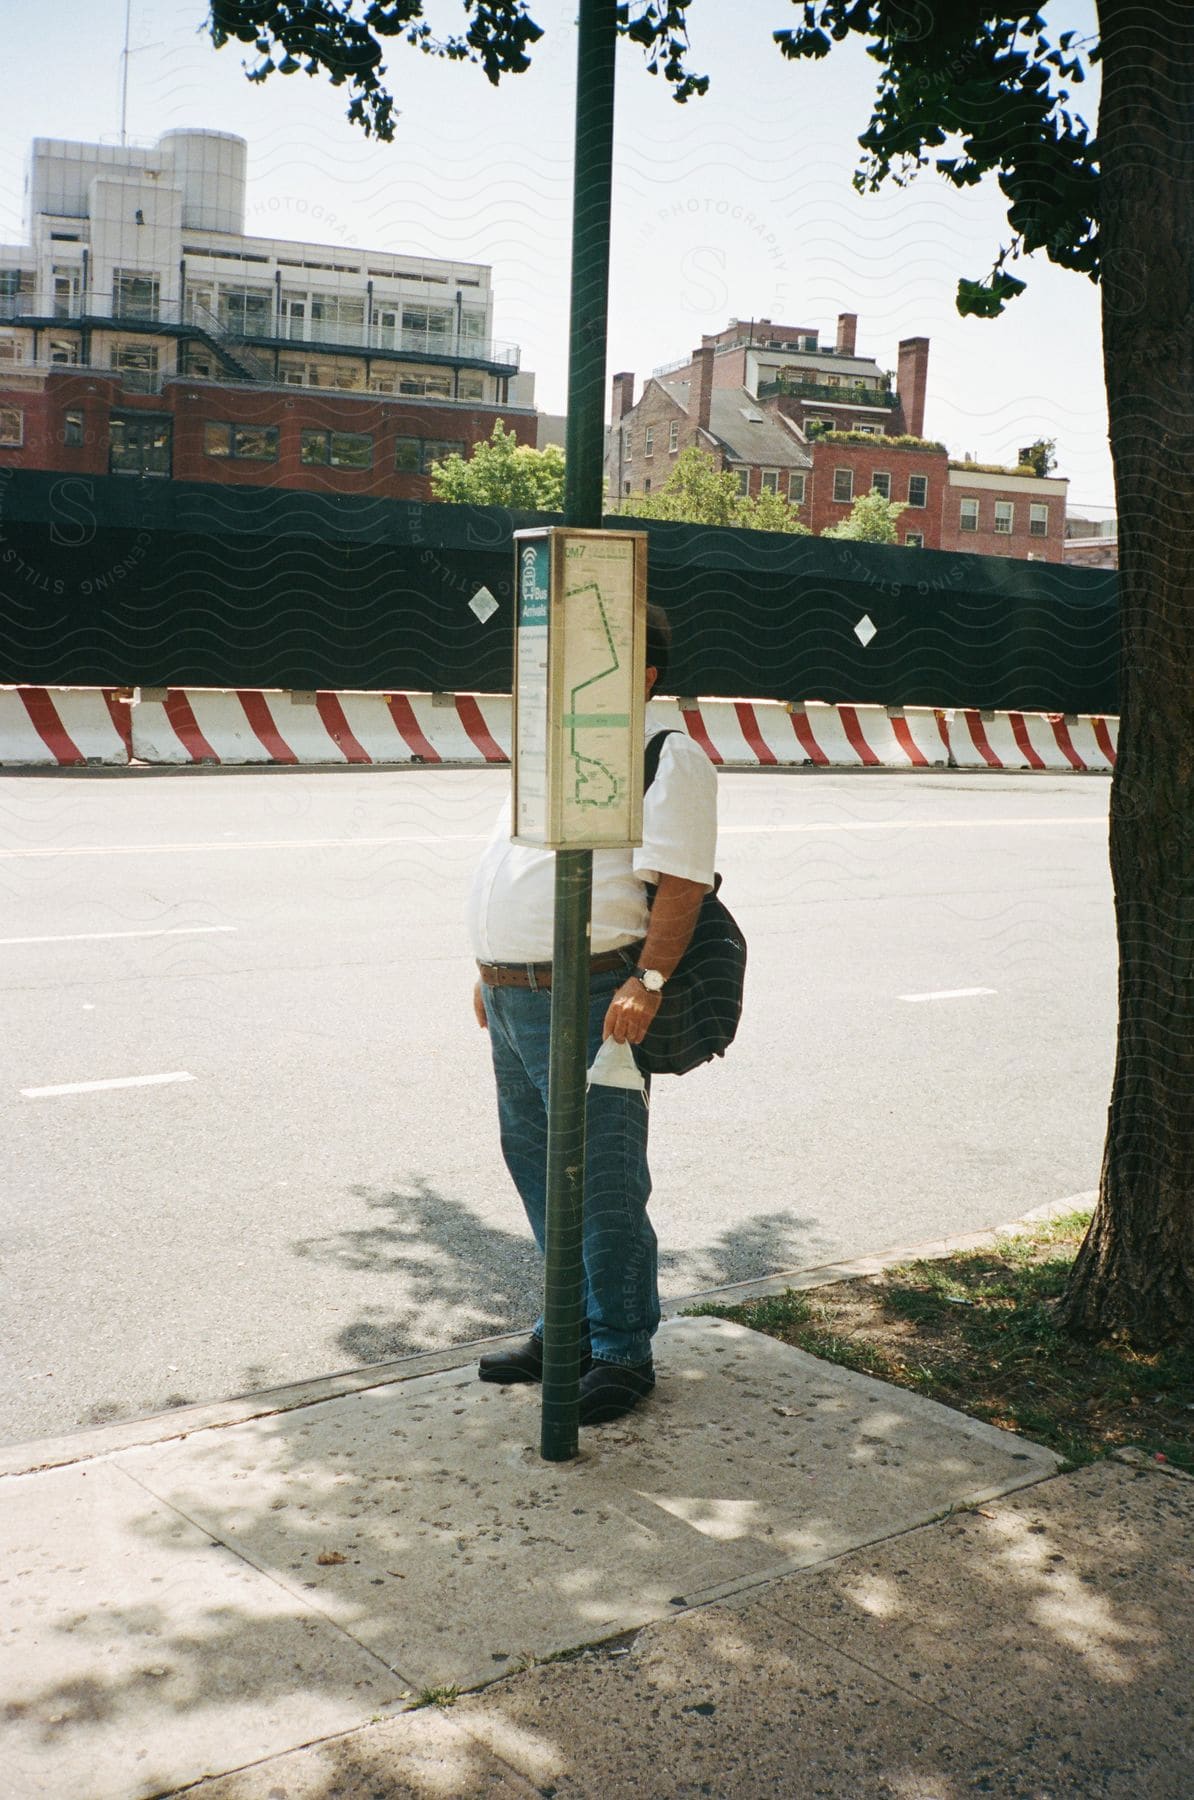 A man carrying a backpack stands behind a street pole, hiding his face at mid-day